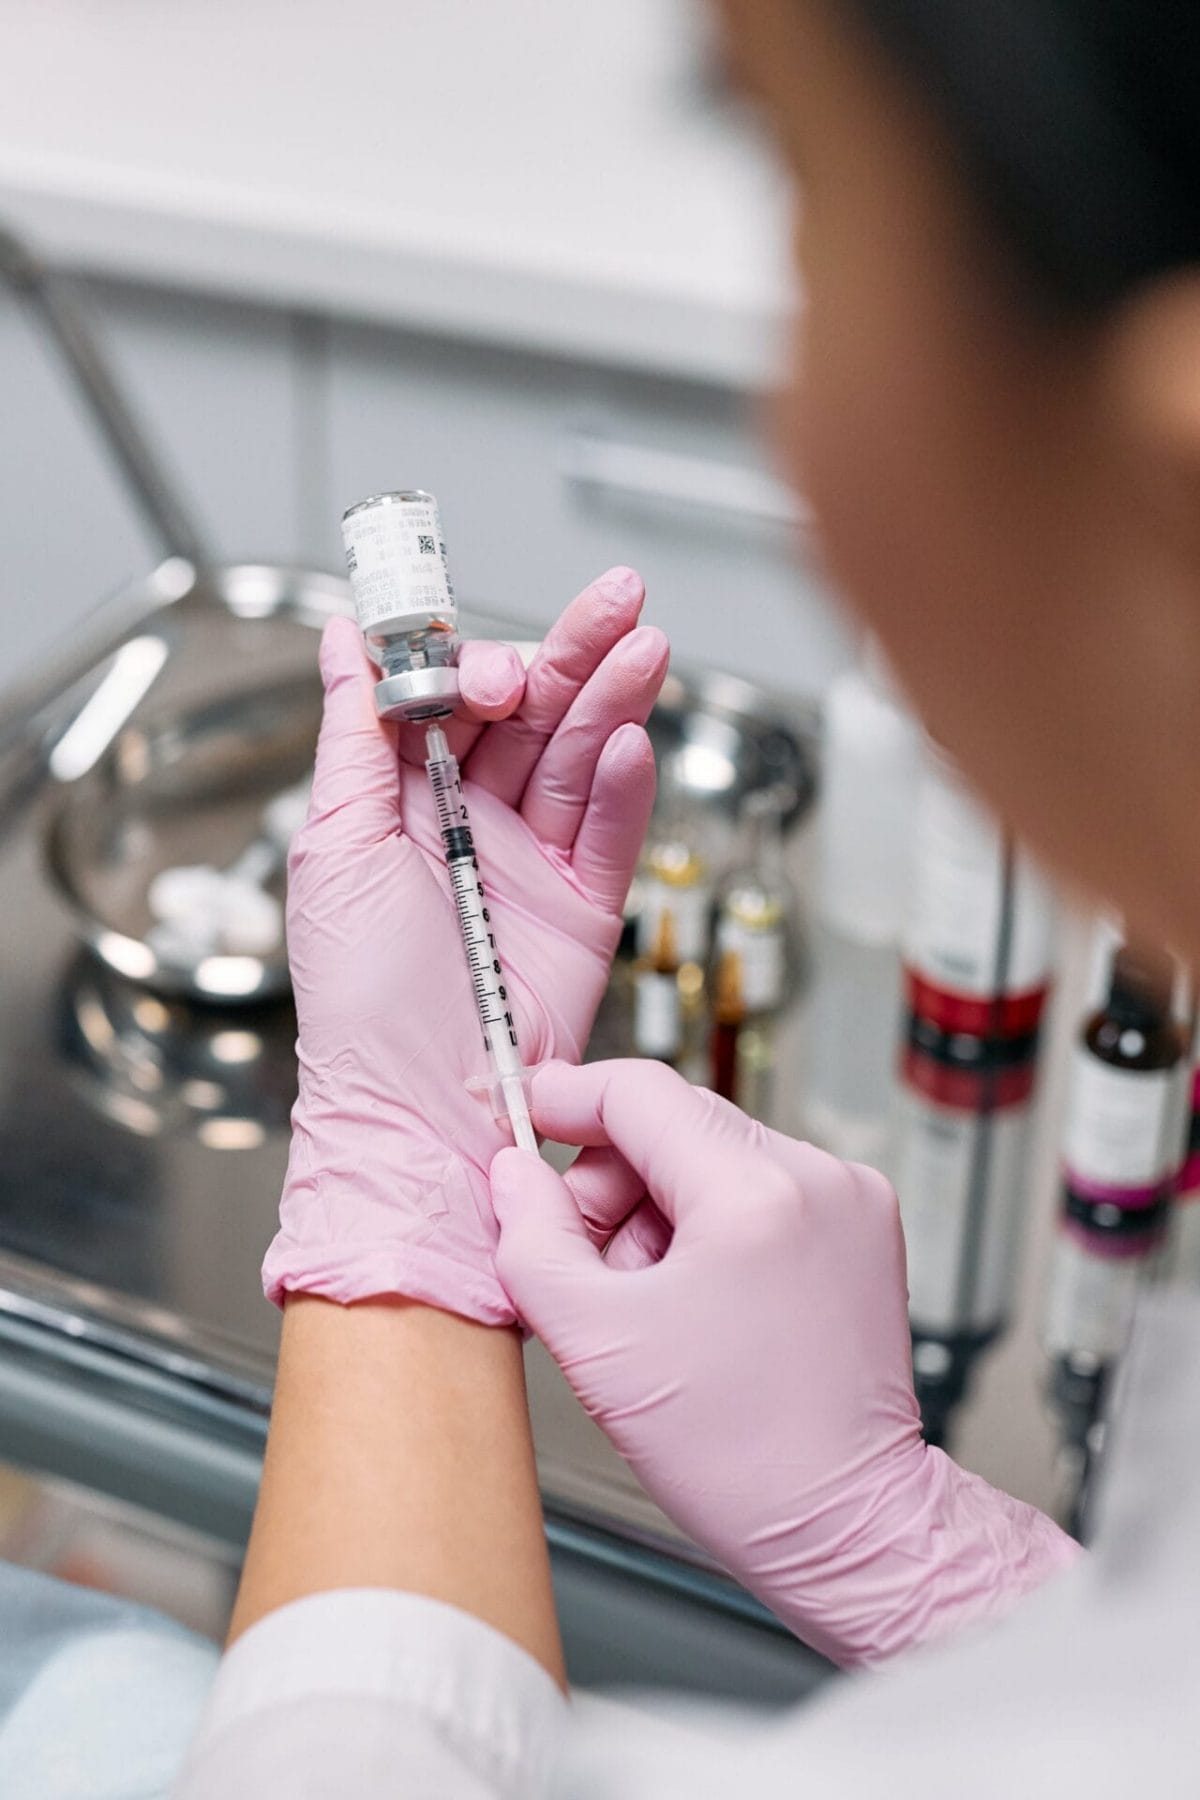 A woman in pink gloves expertly holds a syringe, preparing to administer a cosmetic injectable to a client.